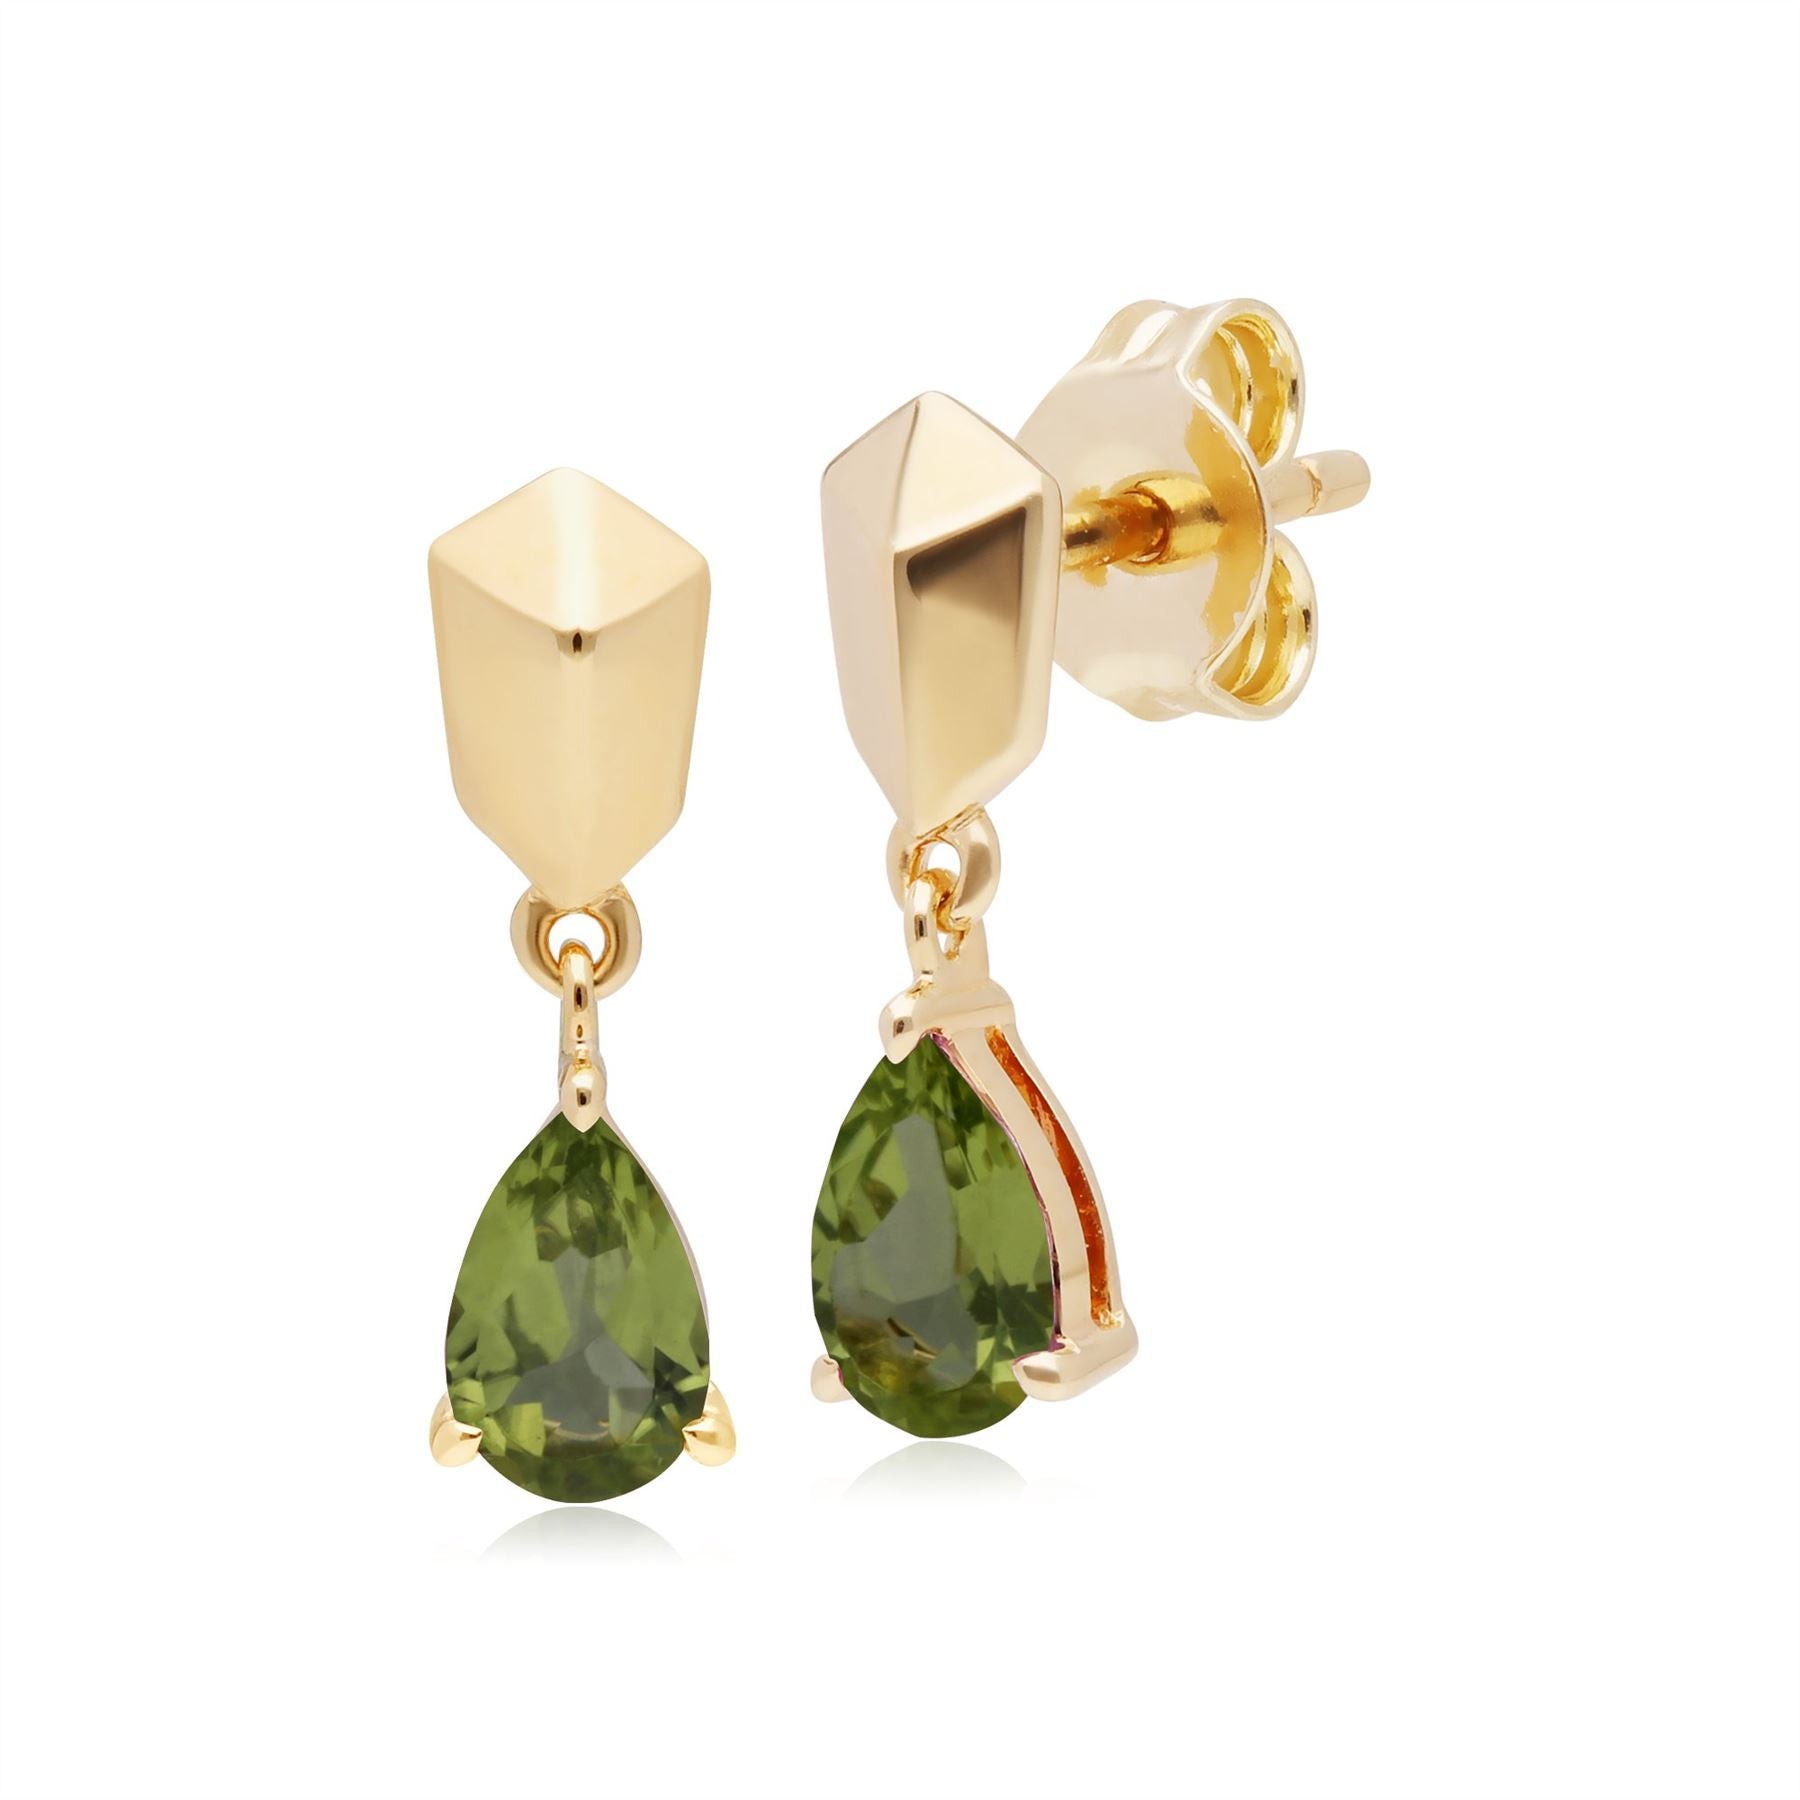 Micro Statement Peridot Earrings in Gold Plated 925 Sterling Silver